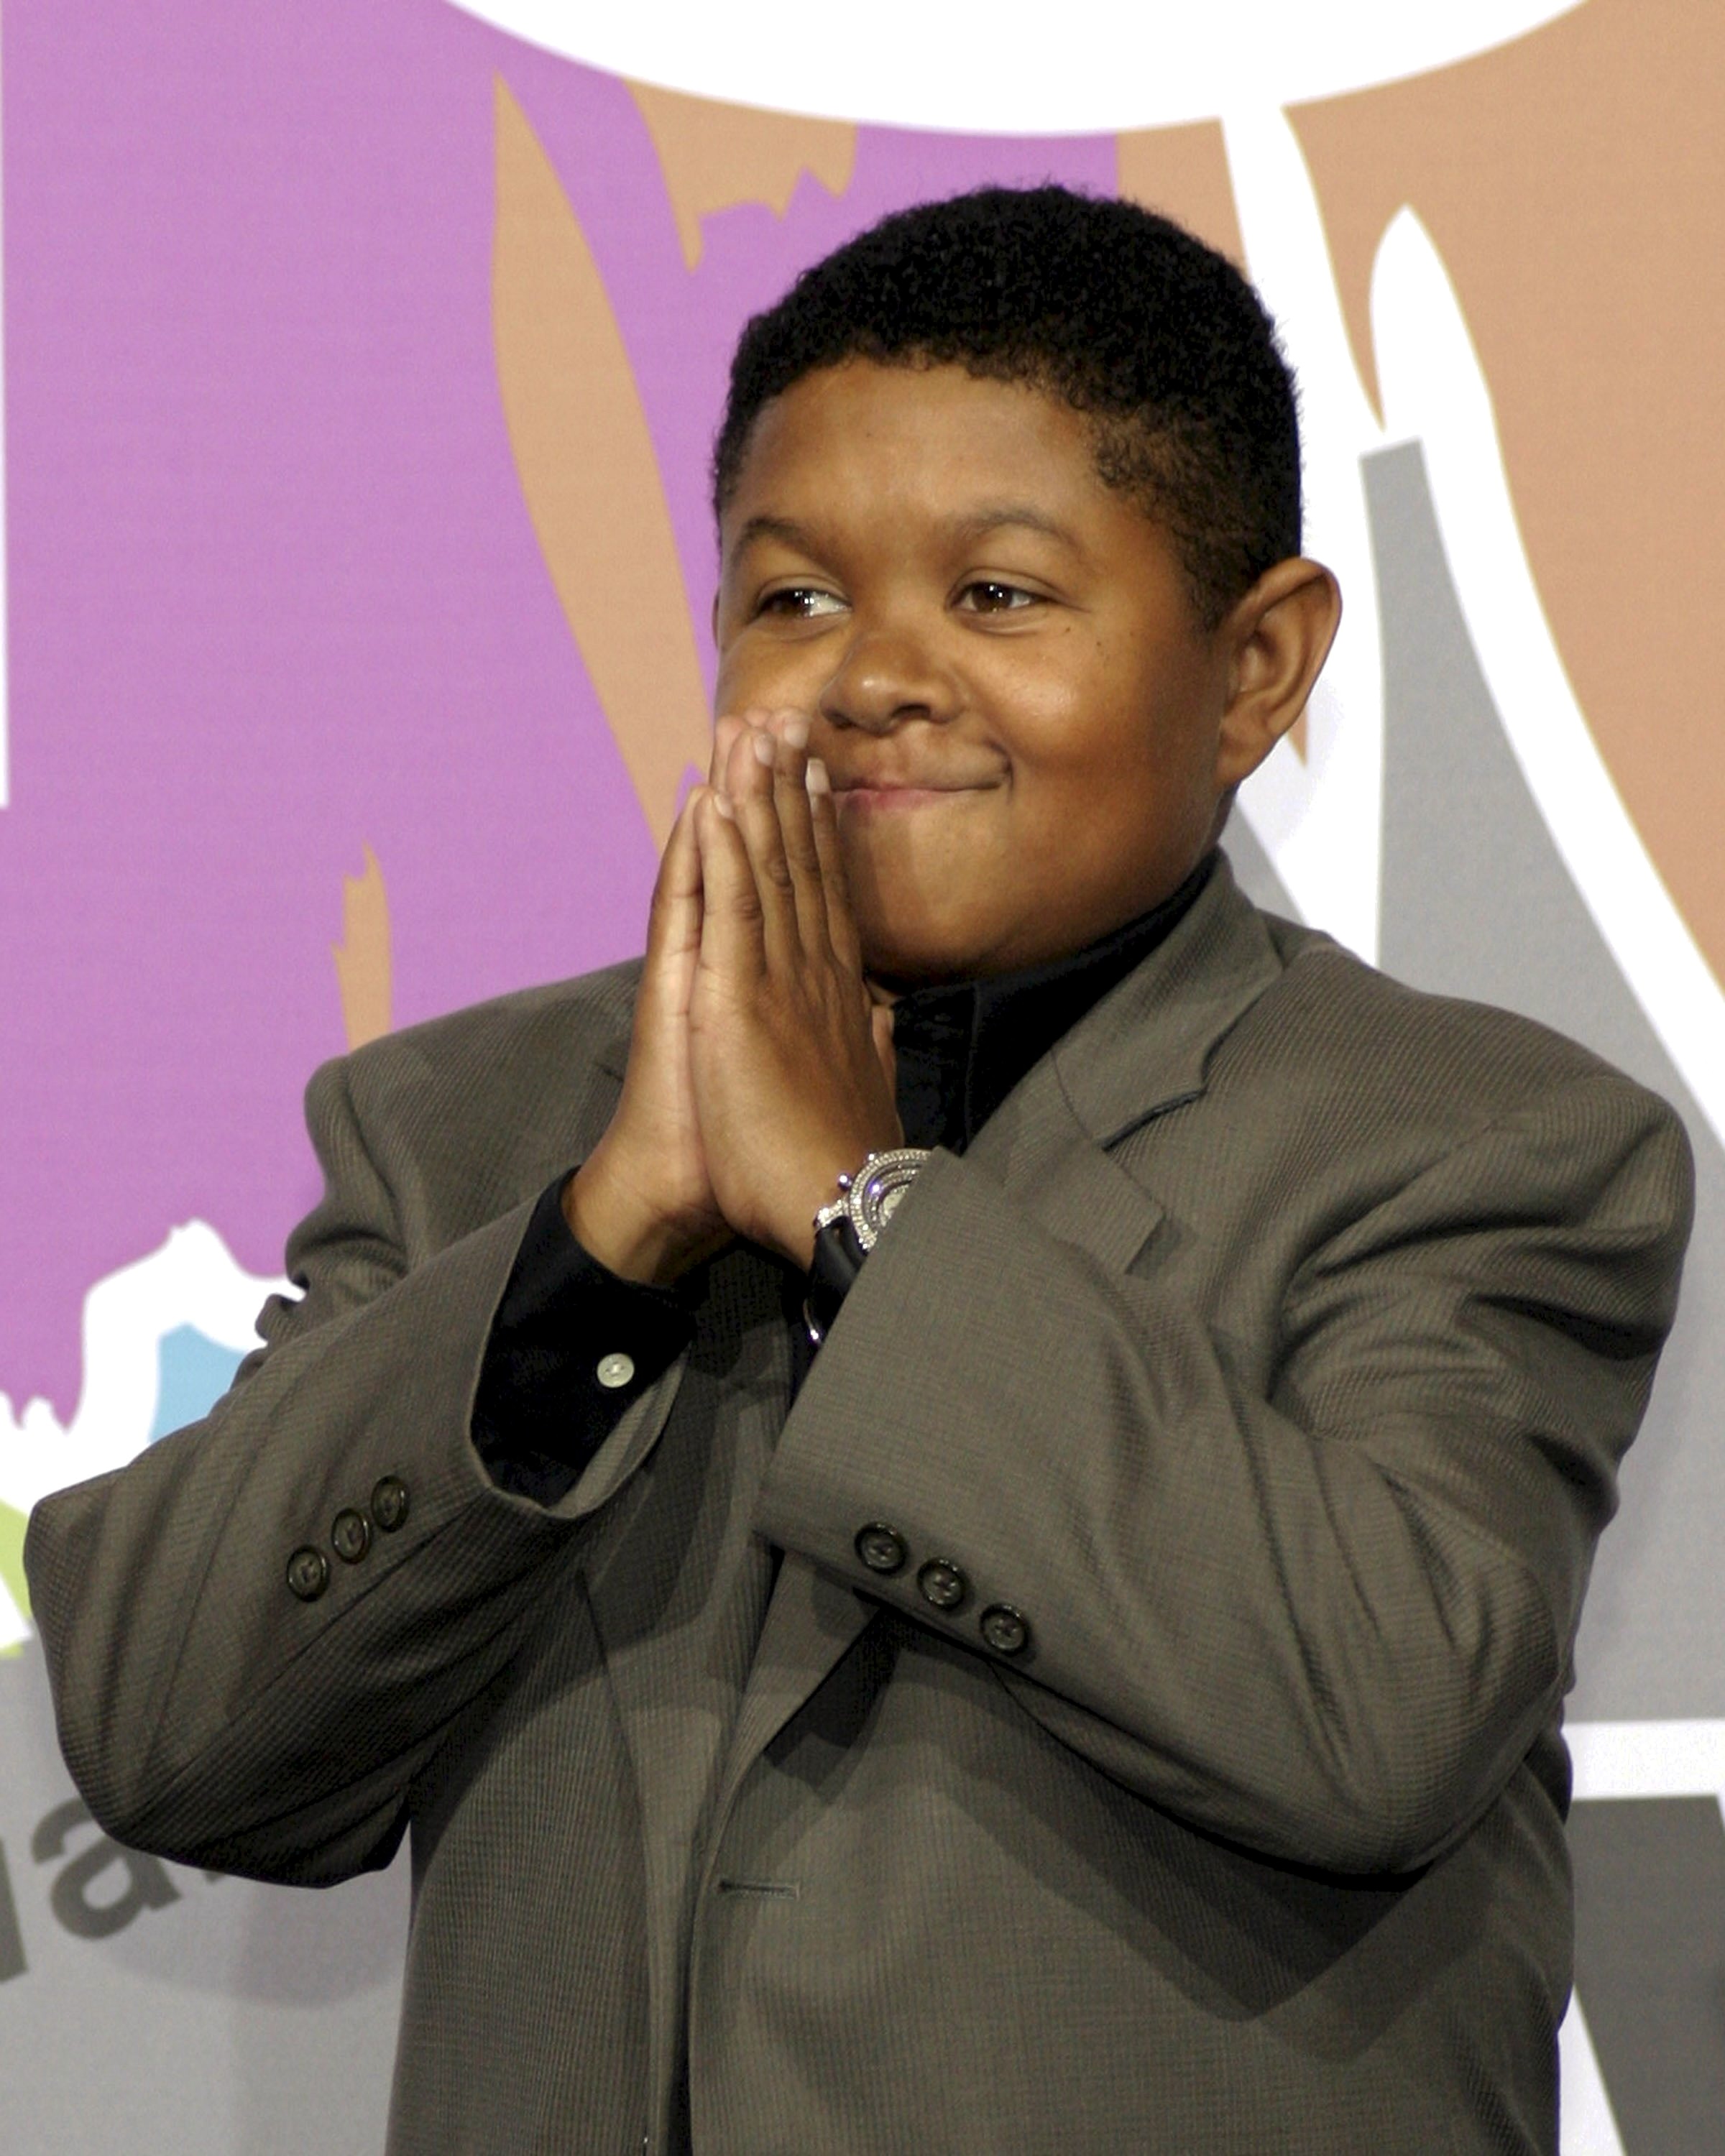 Emmanuel Lewis attends the BET Comedy Awards at the Pasadena Civic Auditorium Press Room on September 28, 2004, in Pasadena. | Source: Getty Images